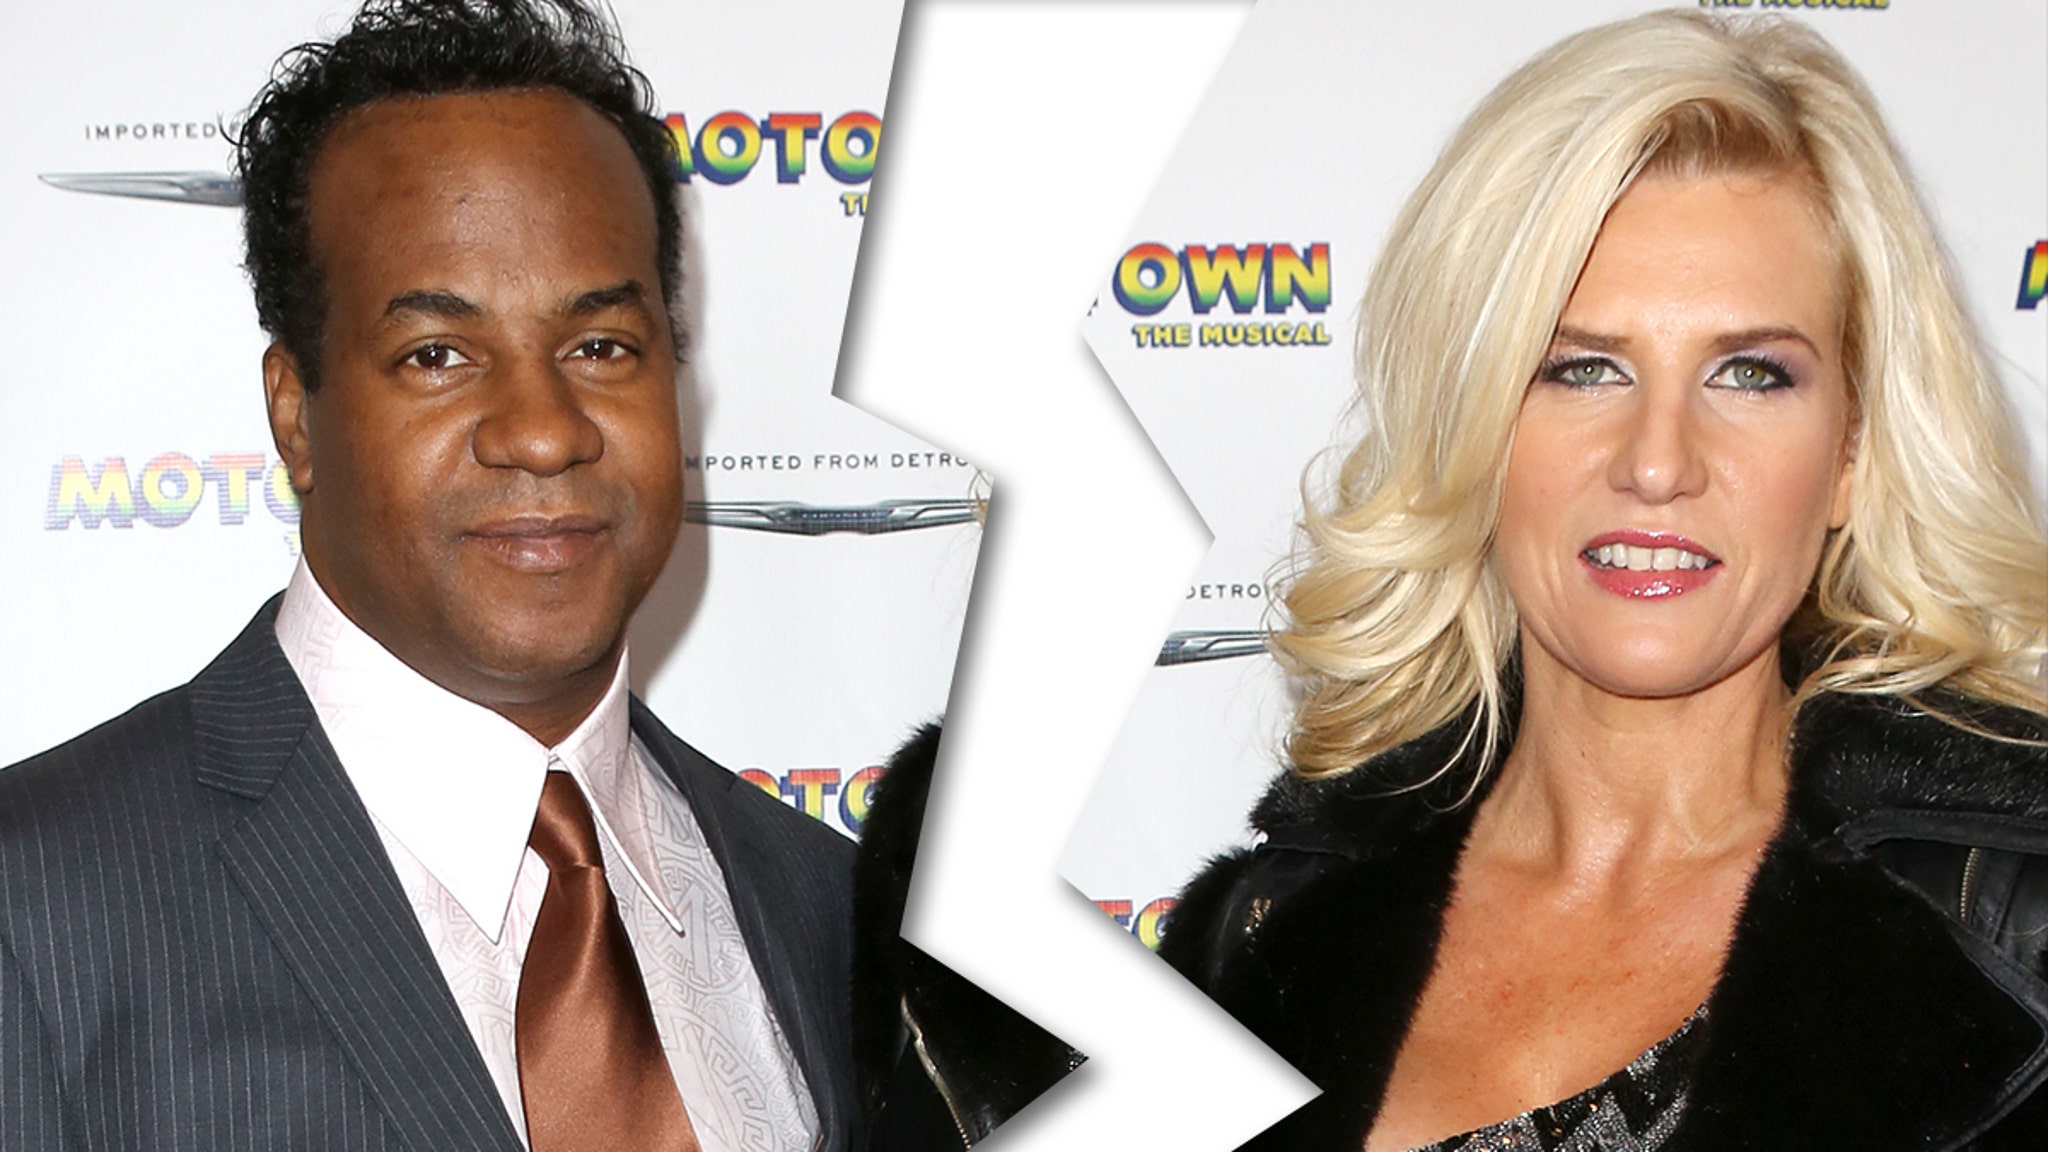 Marvin Gaye III Files For Divorce Two Months After Domestic Violence Arrest thumbnail